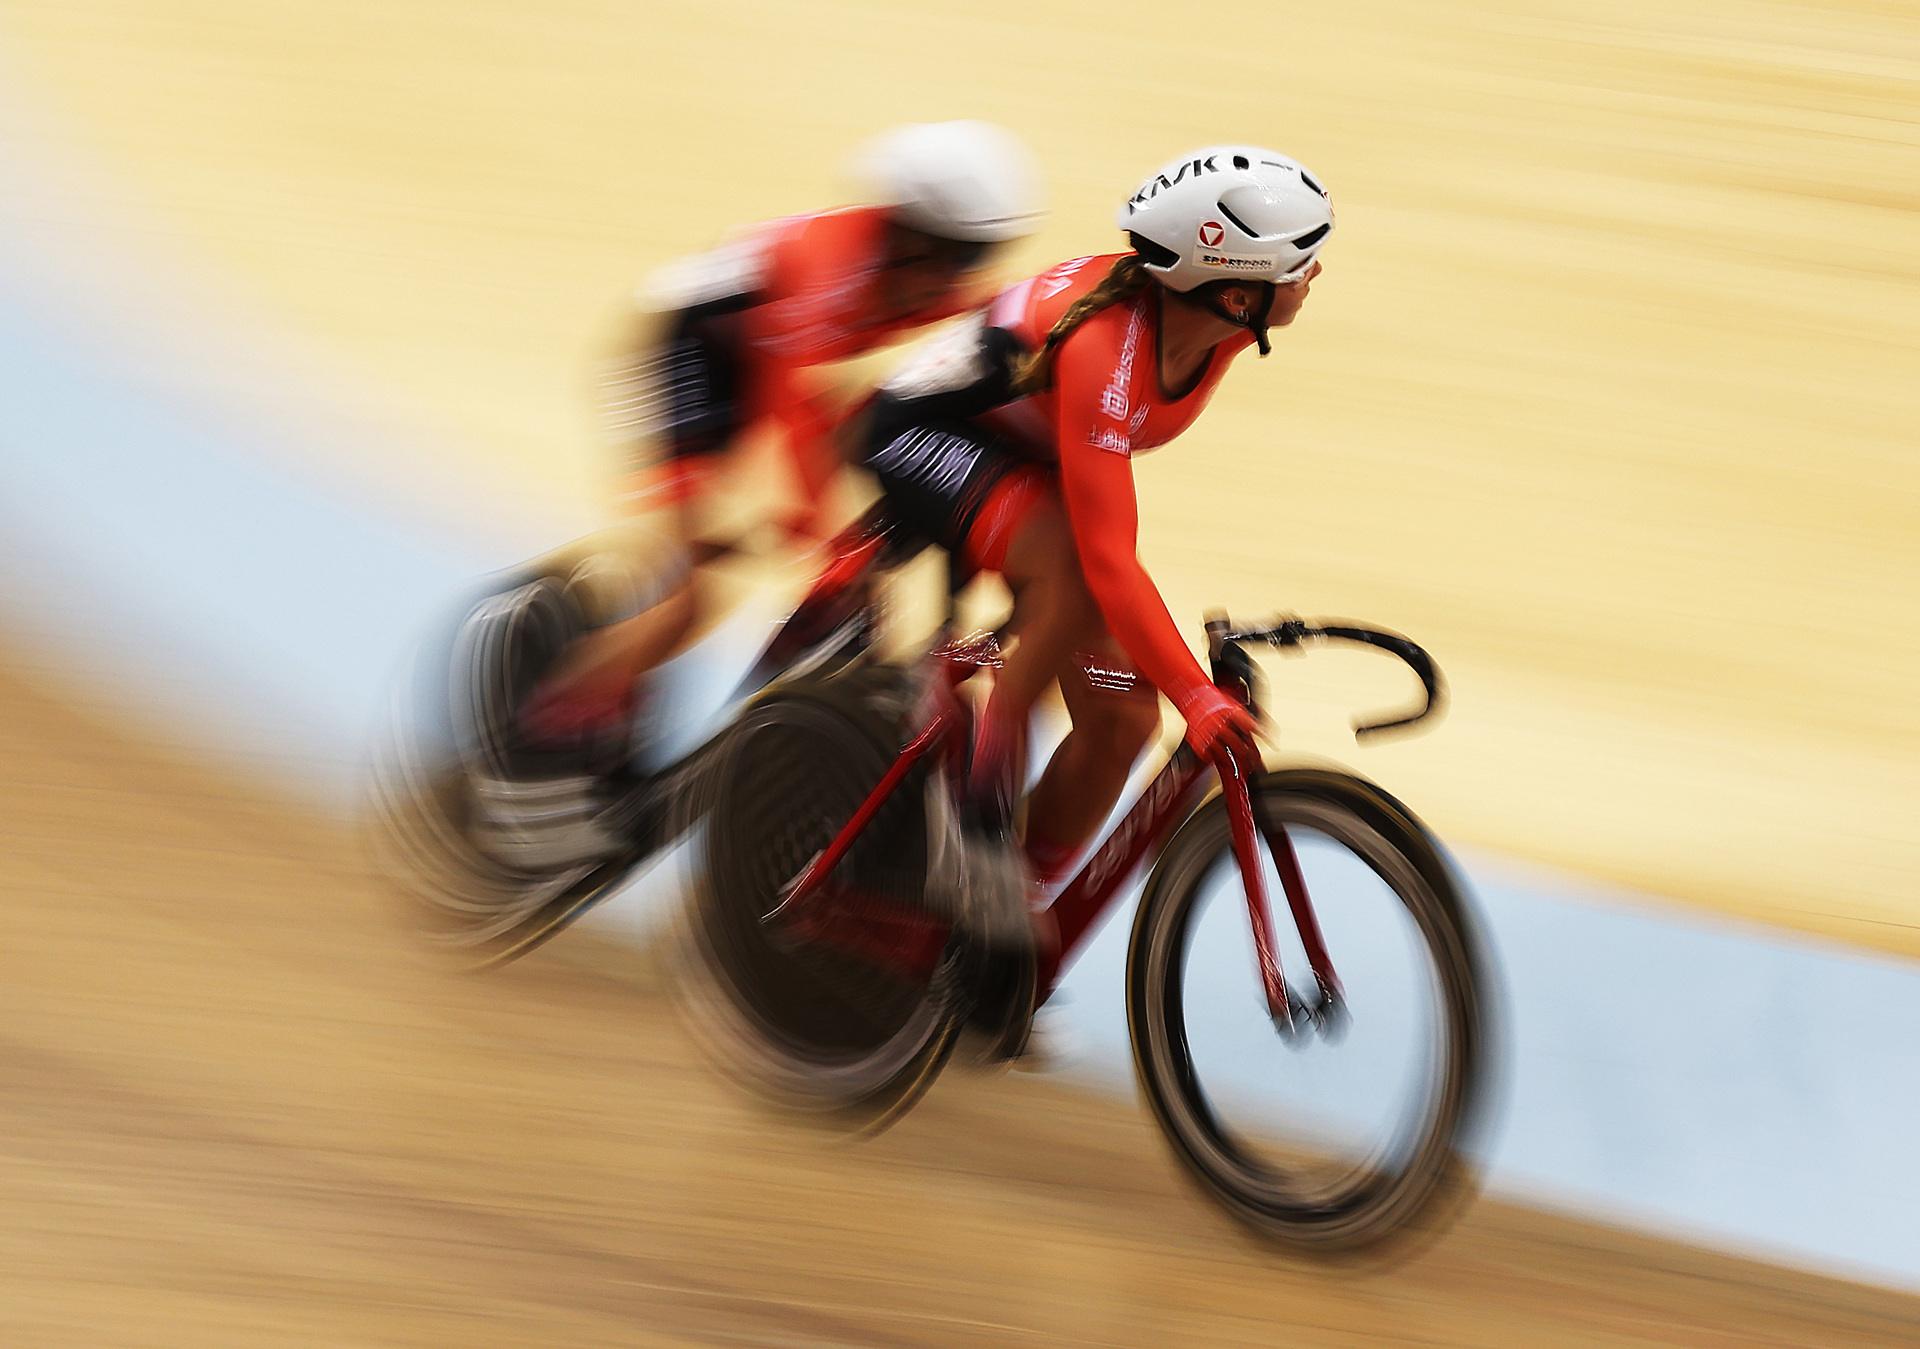 Events at the Velodrome could face disruption during the World Cycling Championships